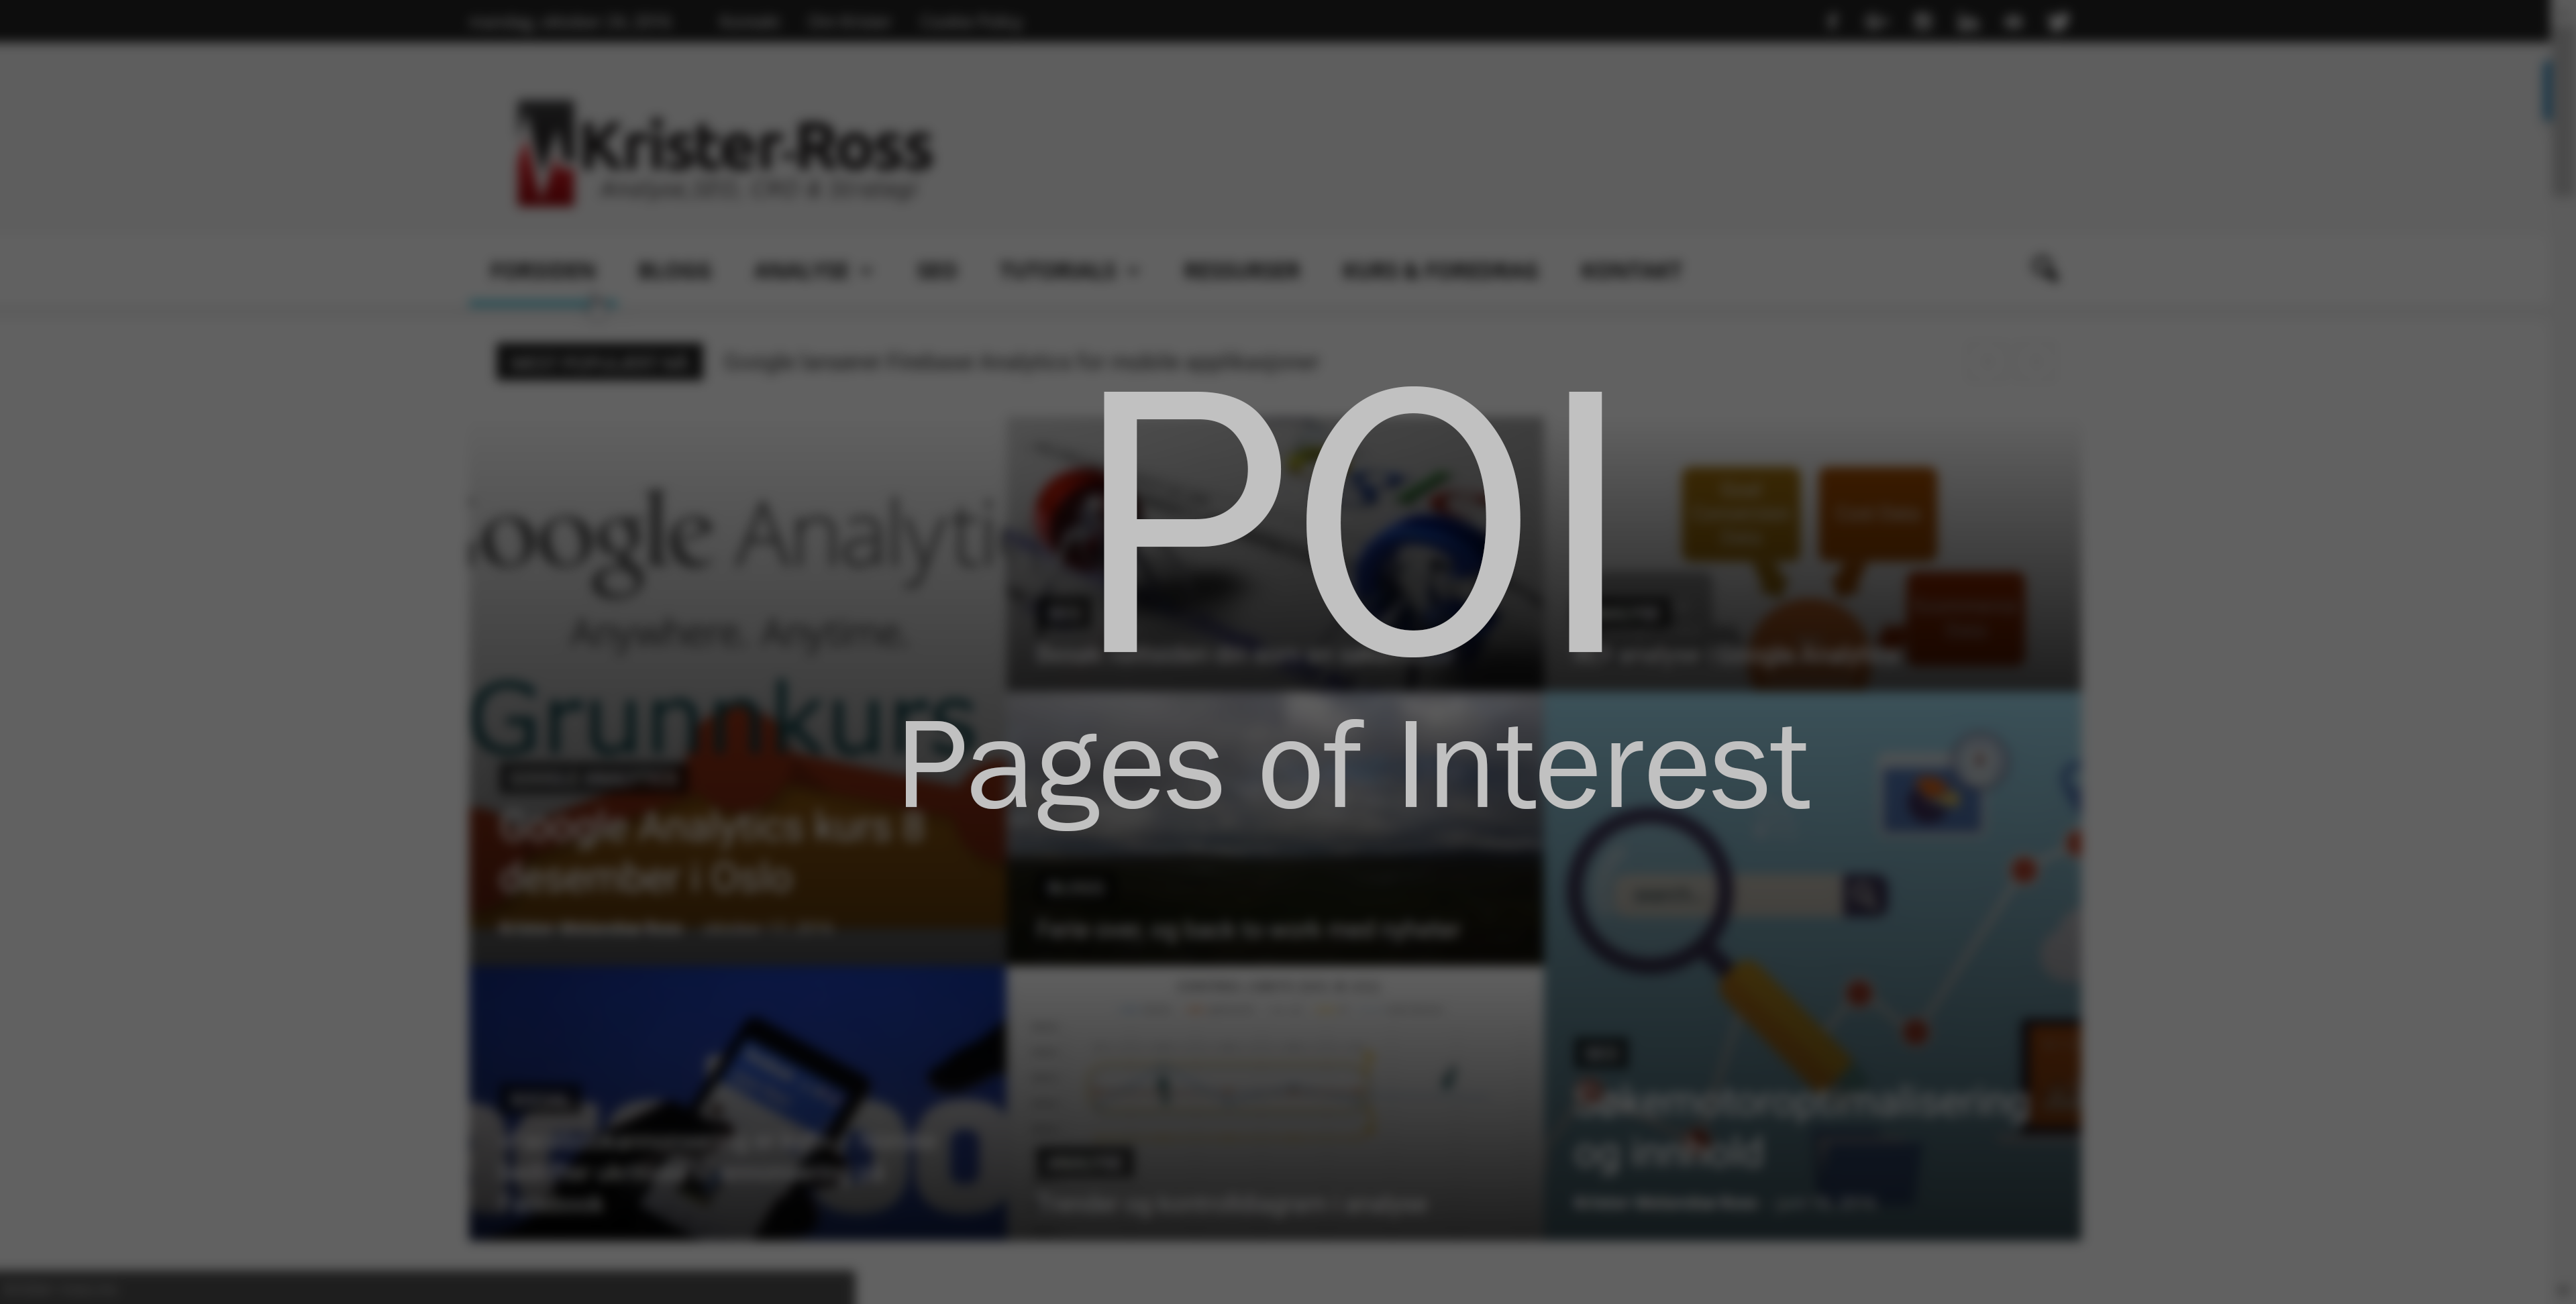 pages-of-interest (POI)